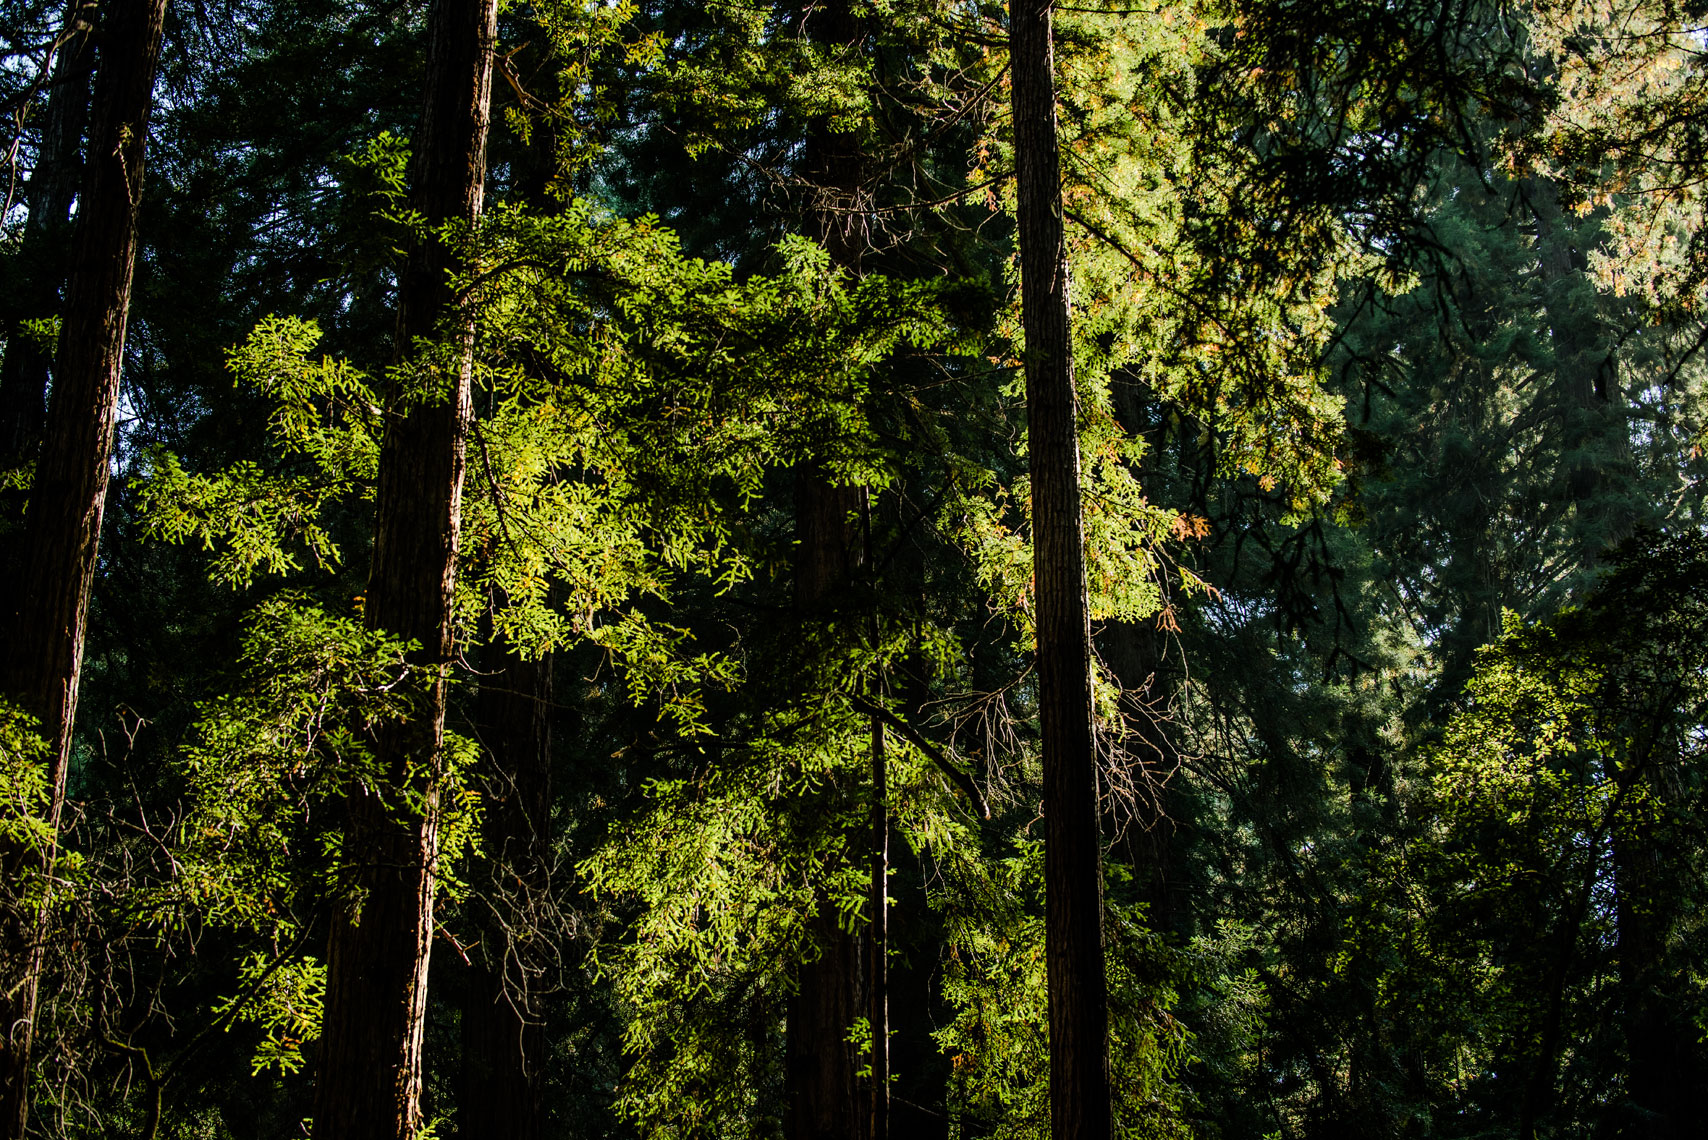 Red fir trees backlit by the sun in Muir Woods, California